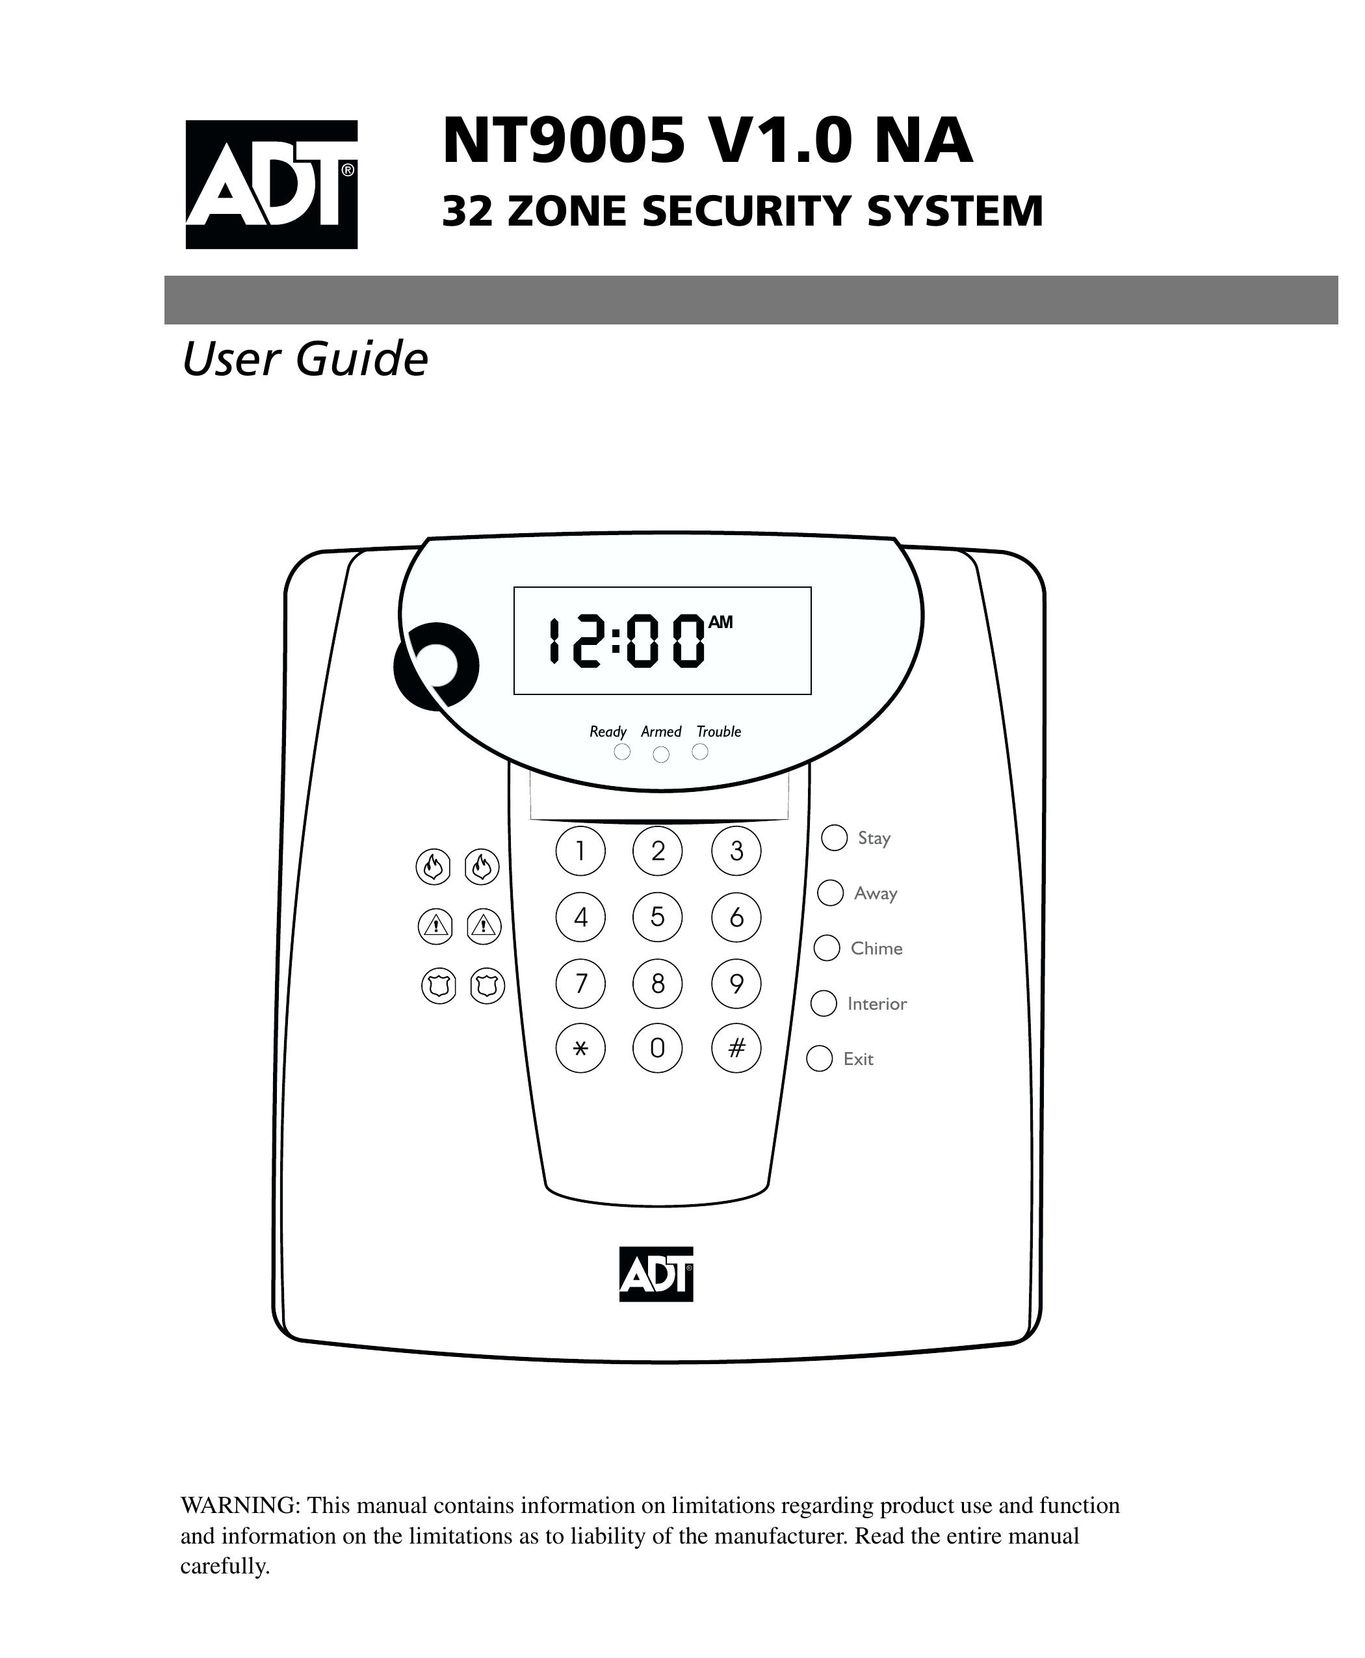 ADT Security Services NT9005 V1.0 NA Home Security System User Manual